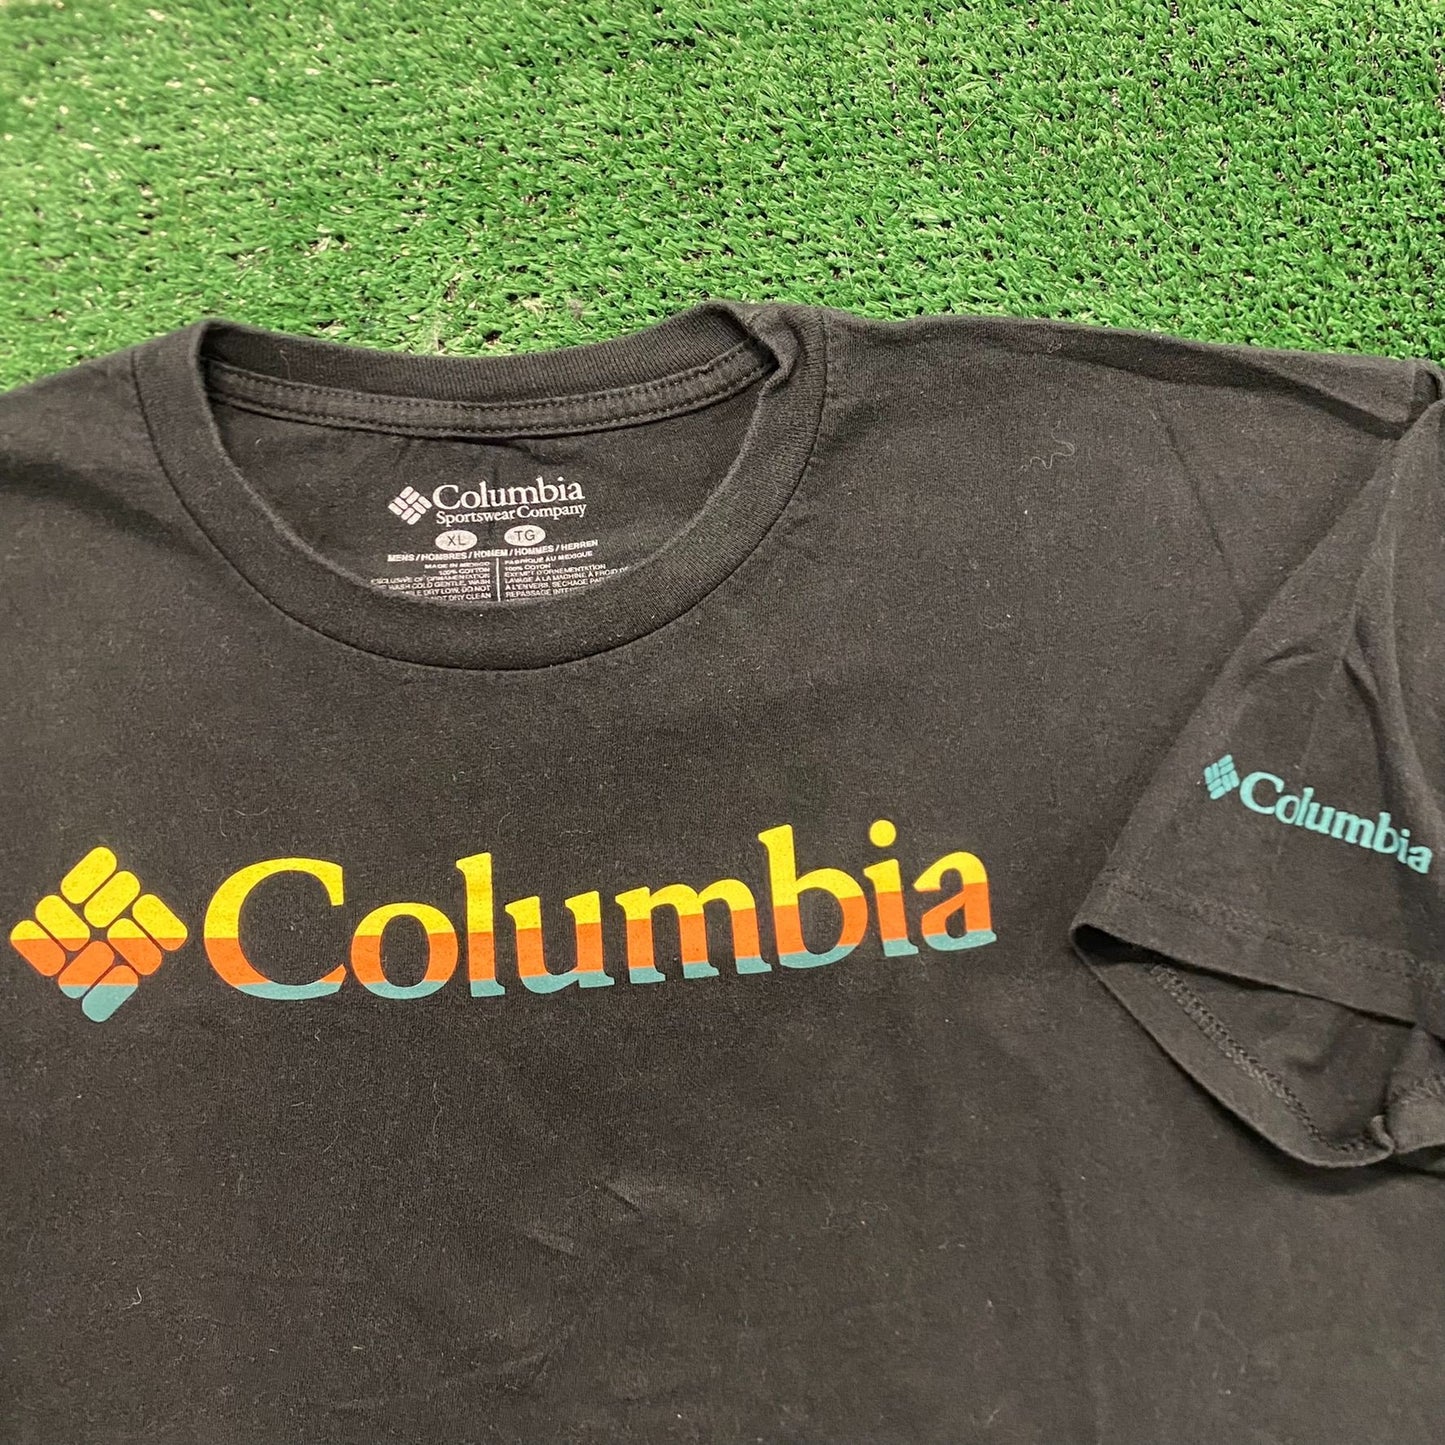 Columbia Sportswear Tri Color Vintage Outdoor T-Shirt